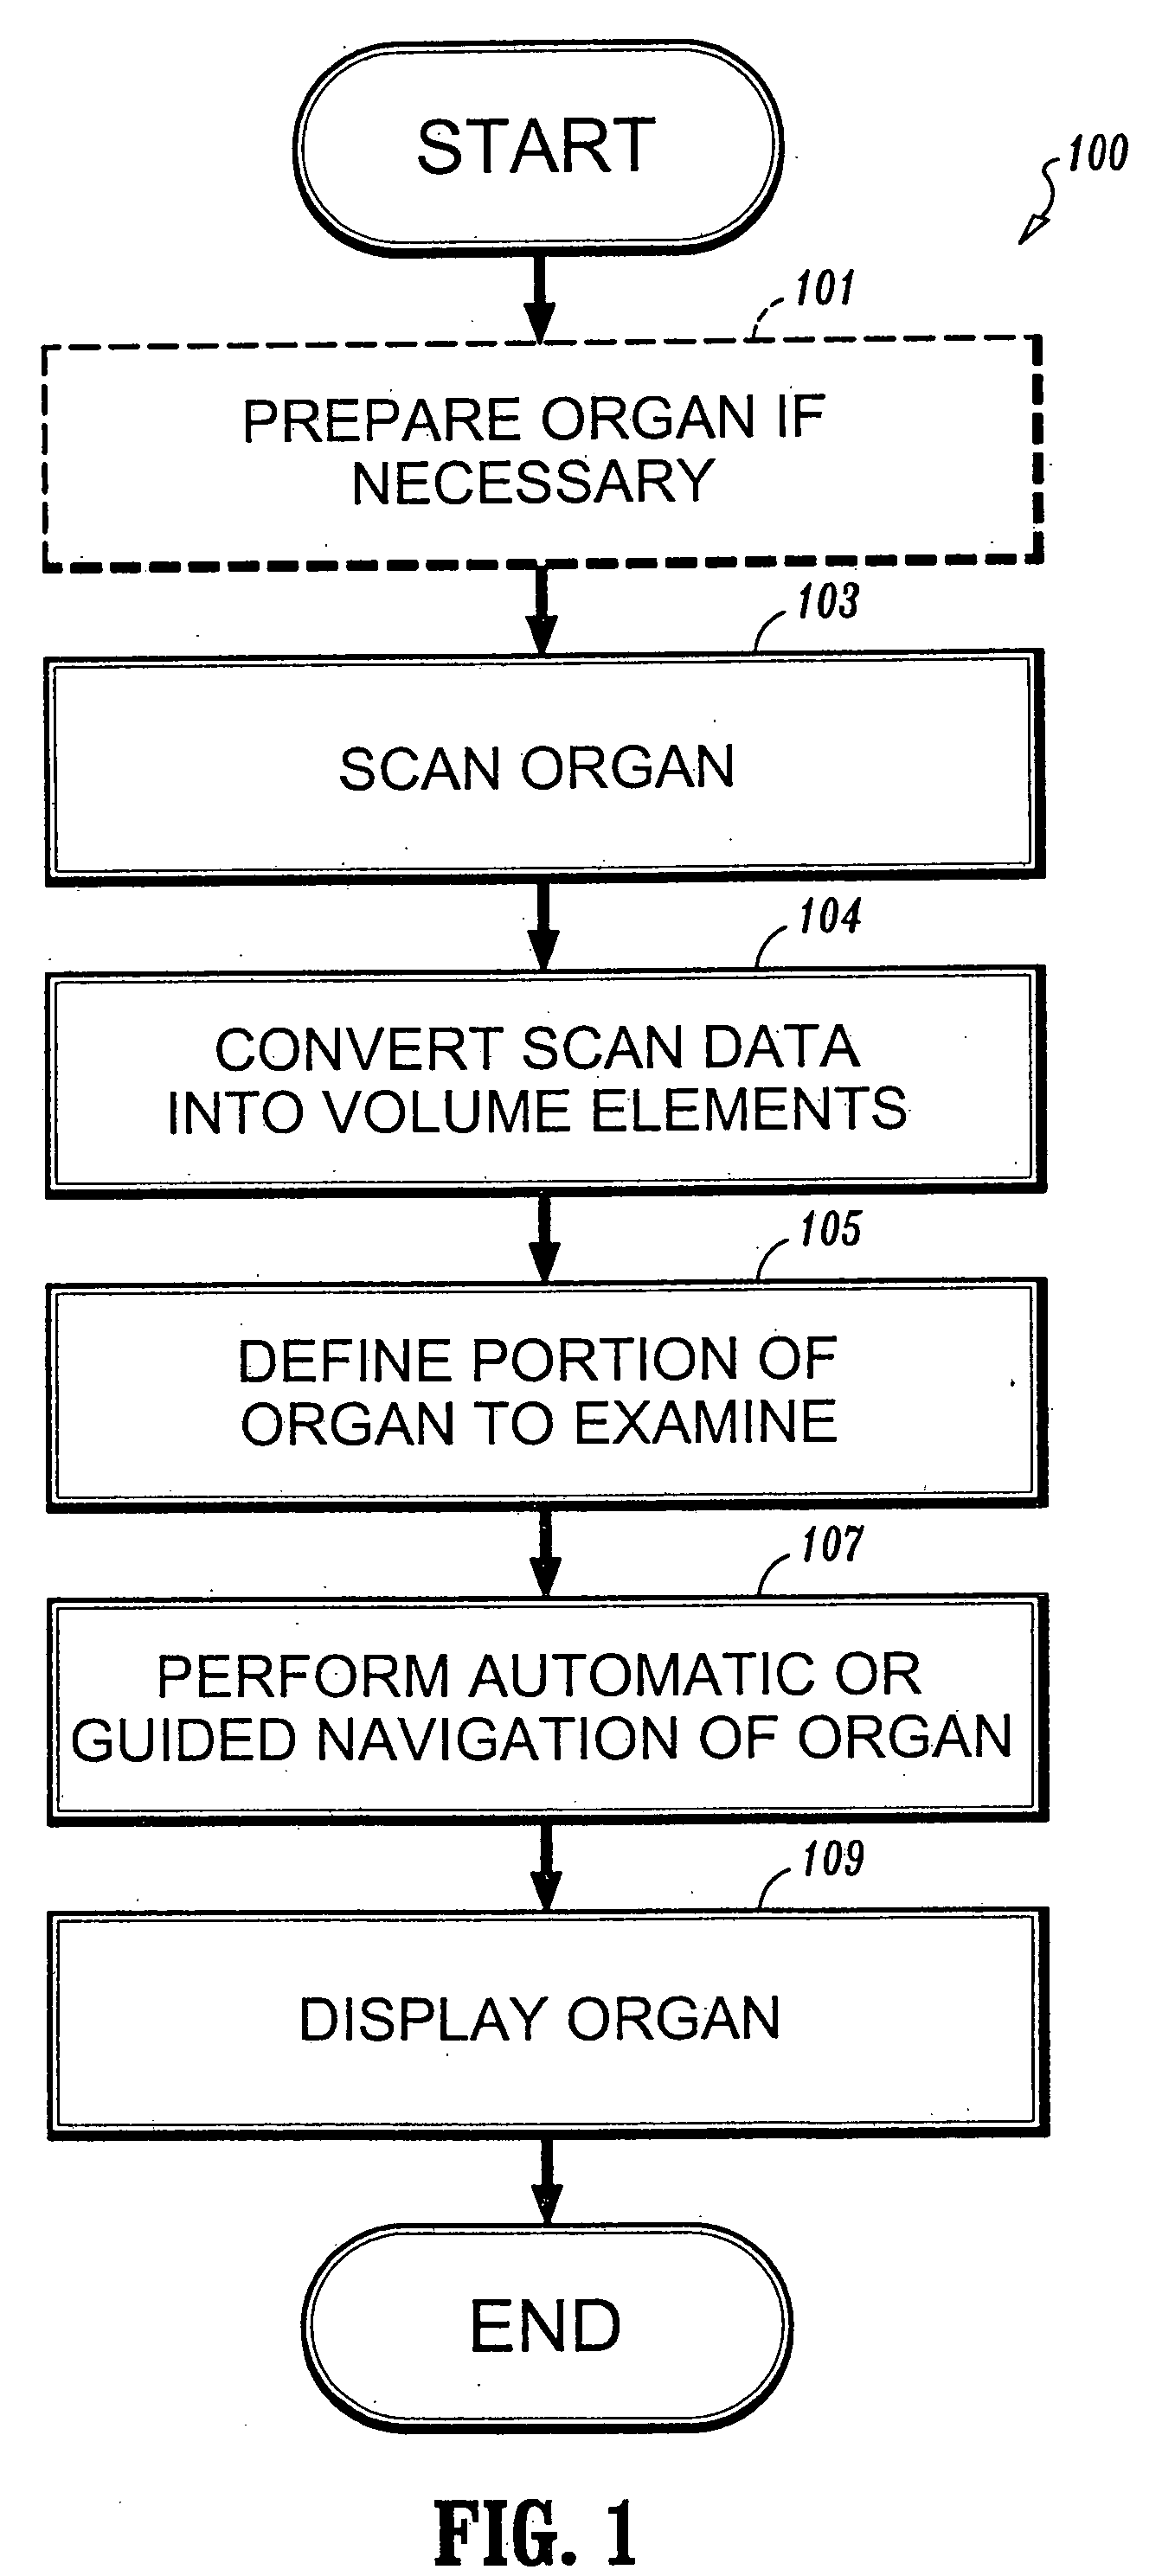 Registration of scanning data acquired from different patient positions